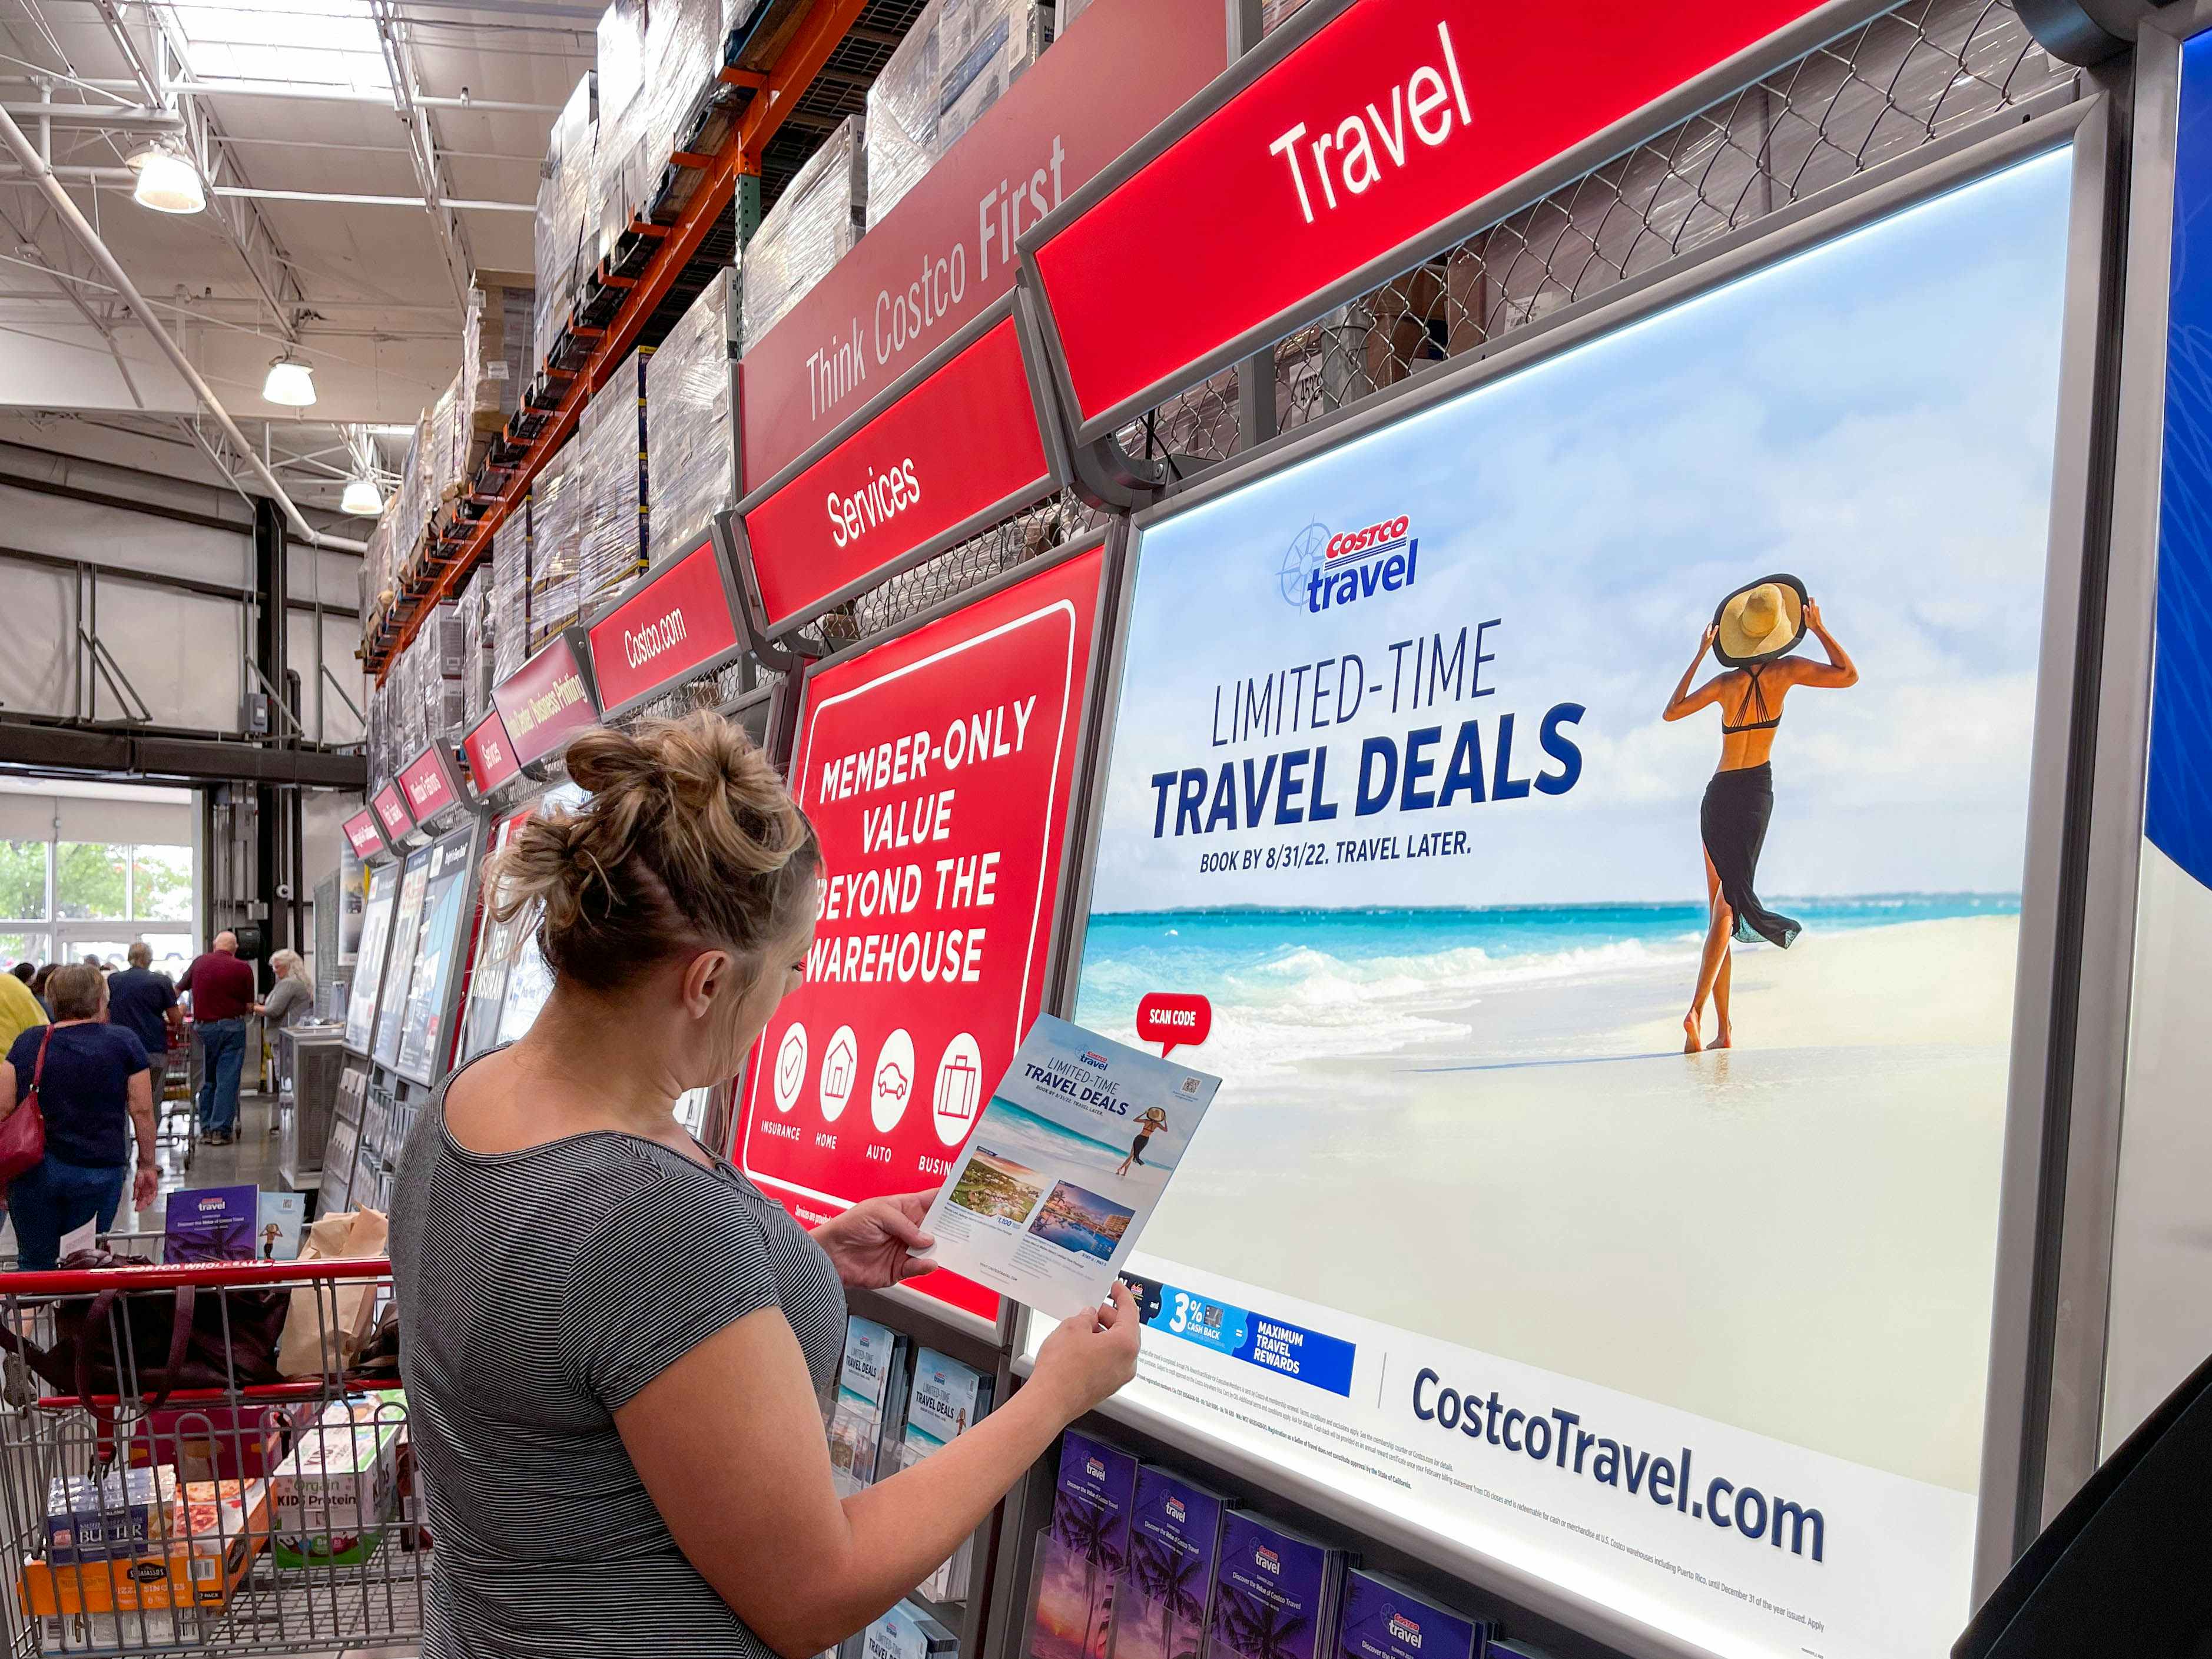 Are Costco Travel Discounts Worth It? - The Krazy Coupon Lady